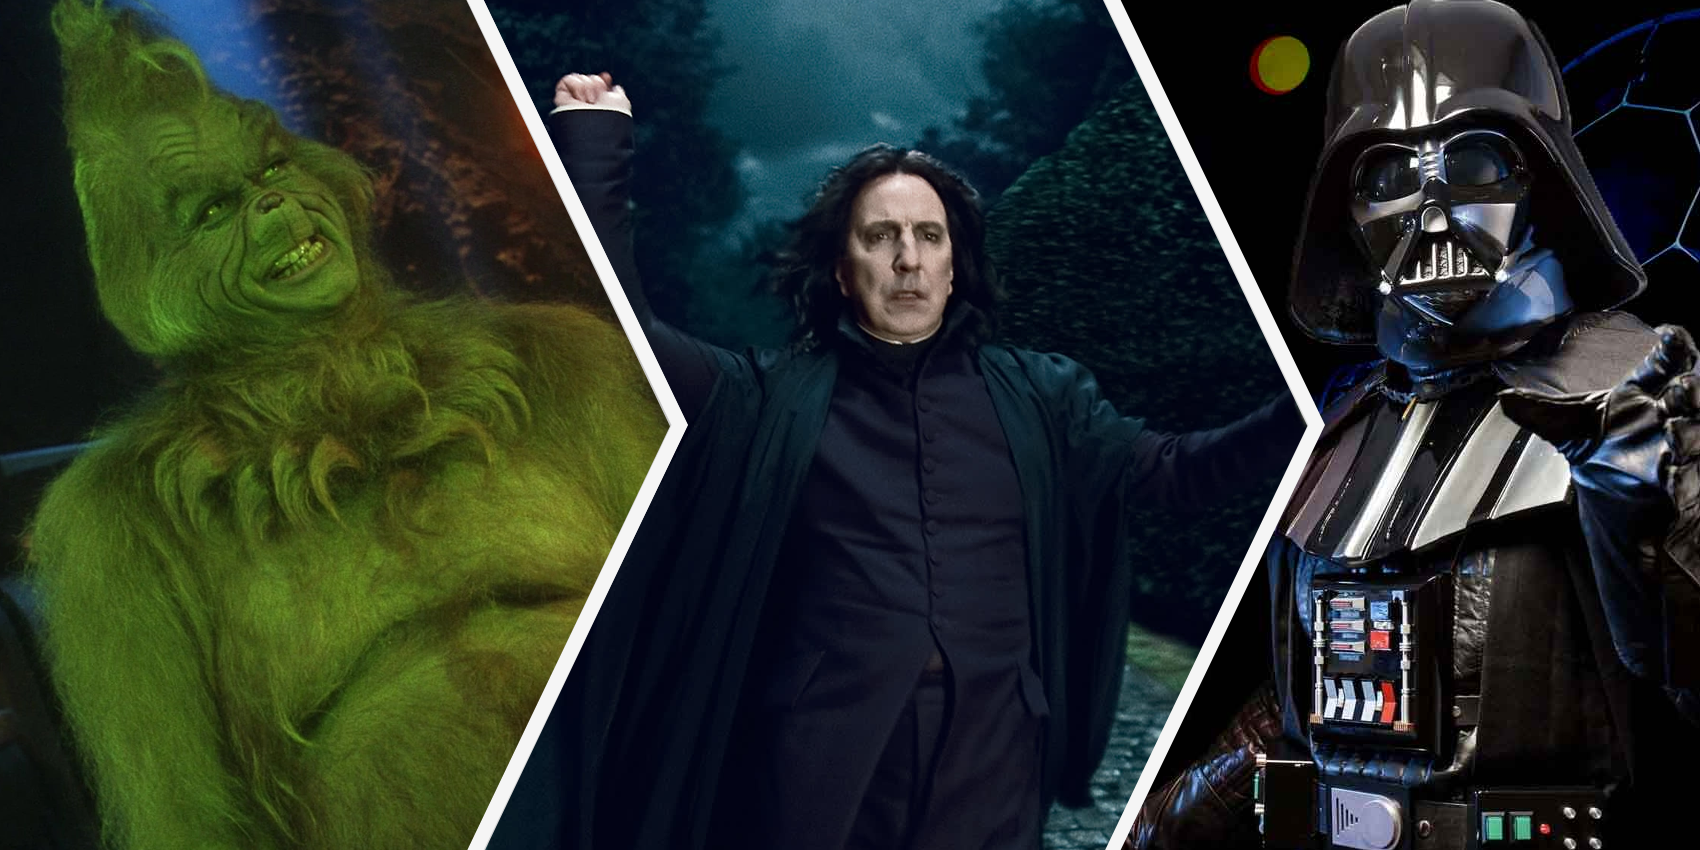 Featured Image The Grinch Severus Snape and Darth Vader